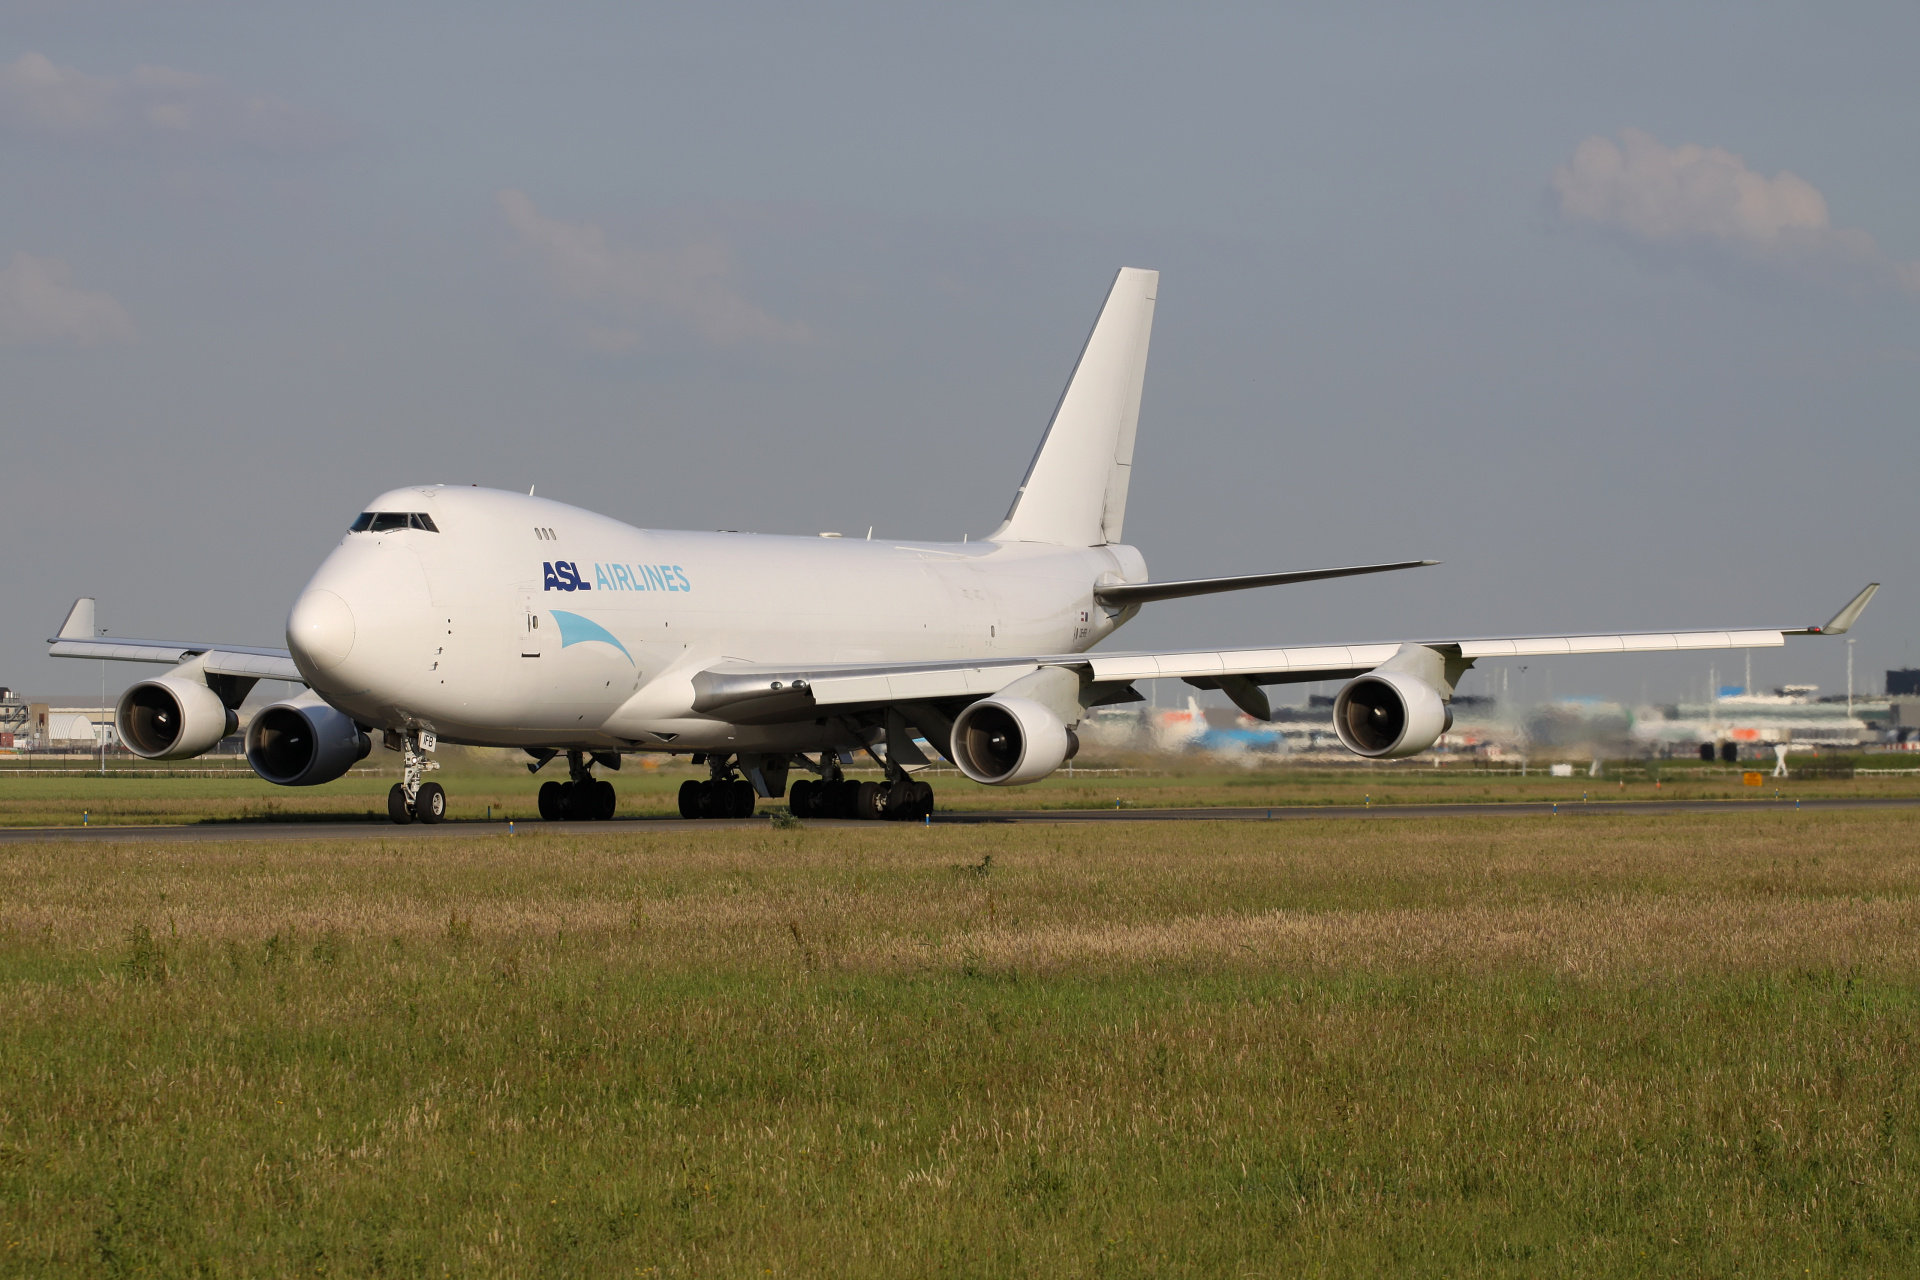 OE-IFB, ASL Airlines Belgium (Aircraft » Schiphol Spotting » Boeing 747-400F)